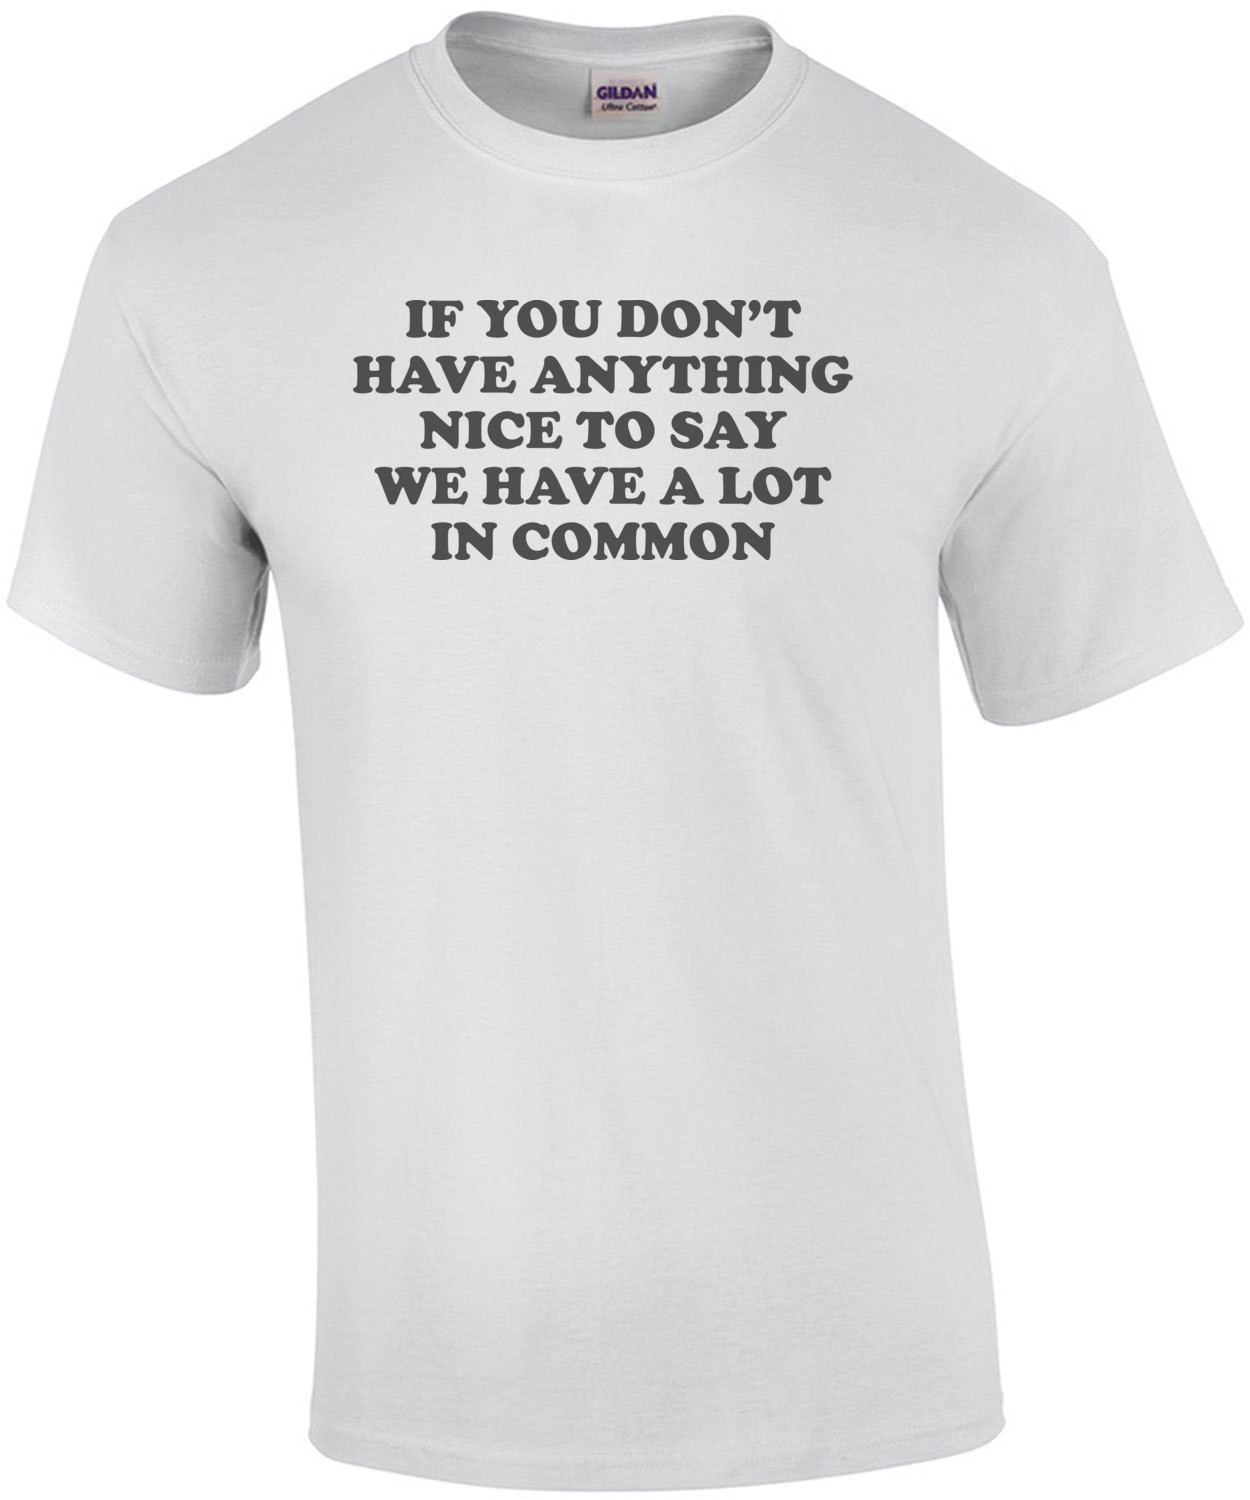 If You Don't Have Anything Nice To Say Then We Have A Lot In Common T-Shirt